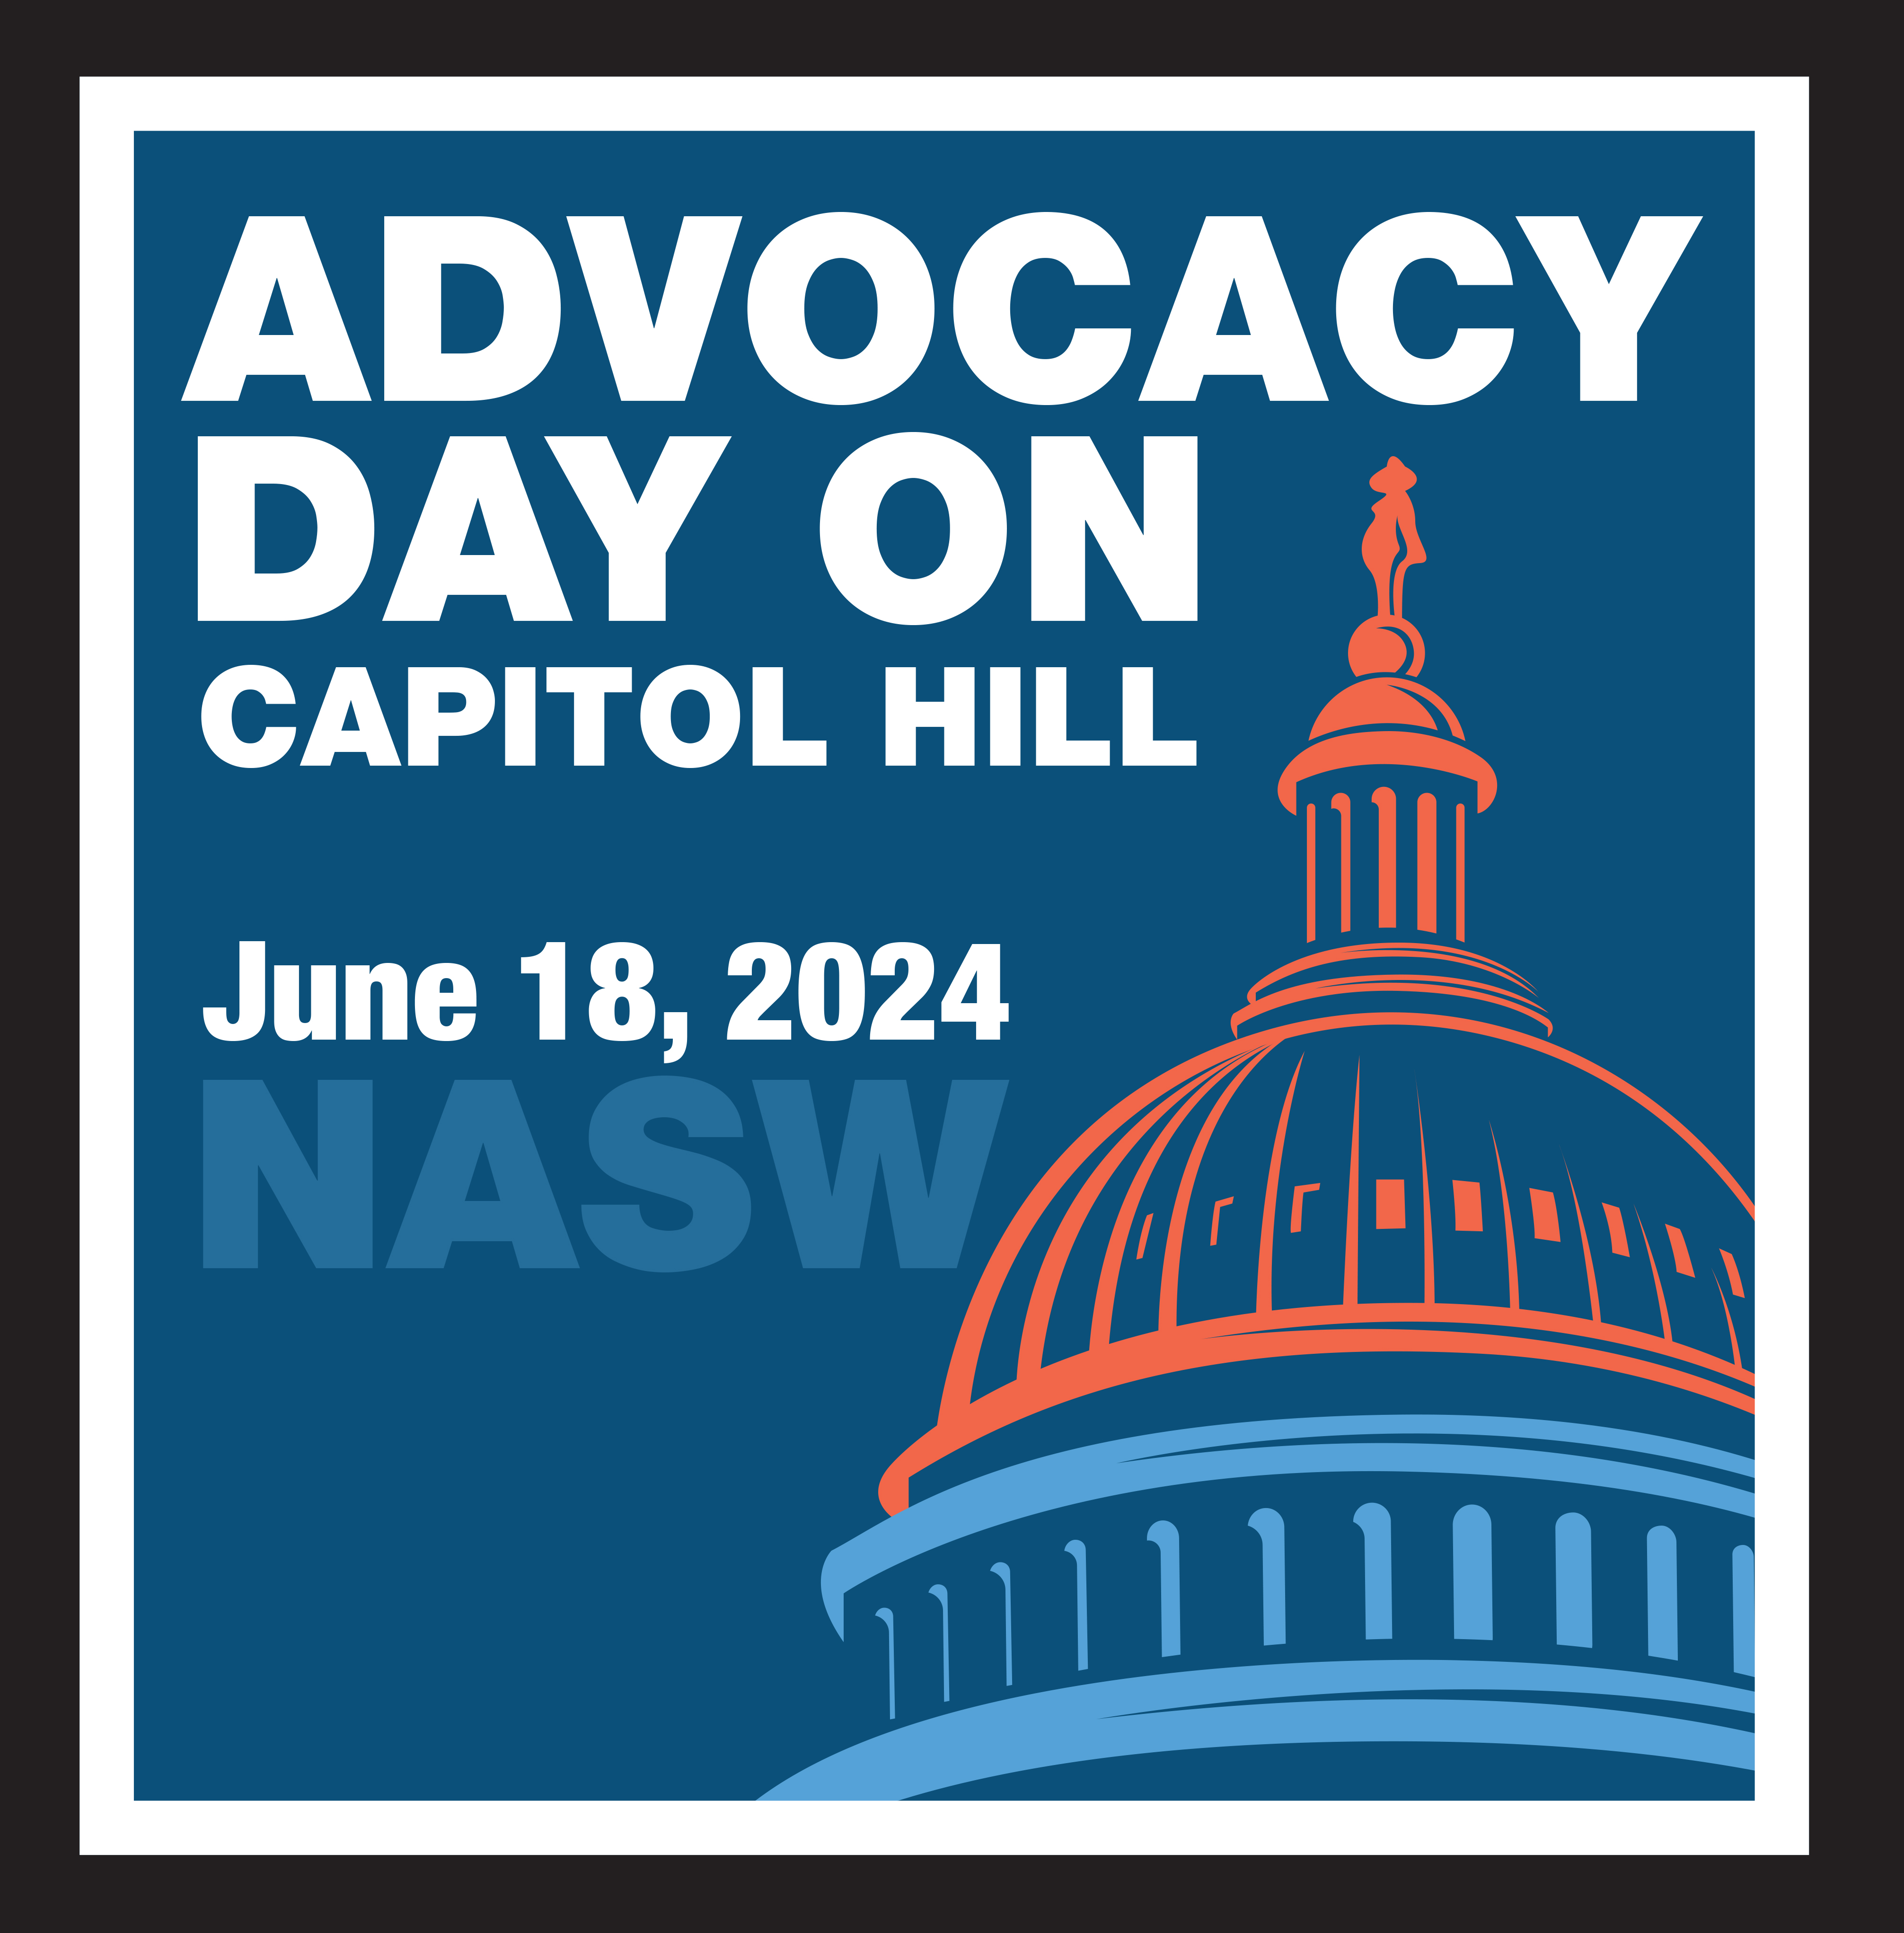 NASW's Advocacy Day on capitol hill